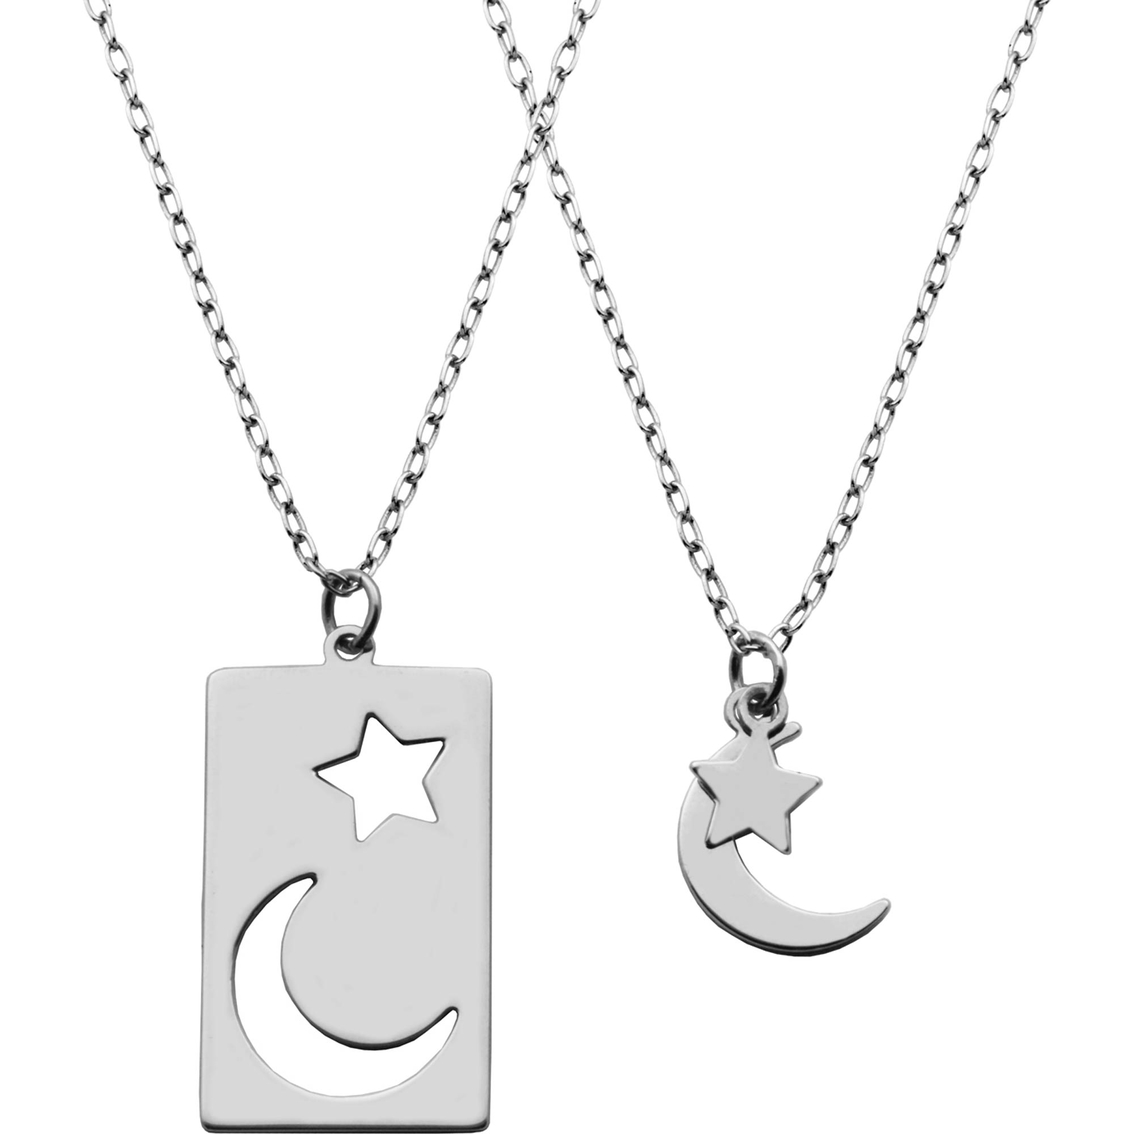 Rhodium Over Sterling Silver Star and Moon Pendant Necklace Set